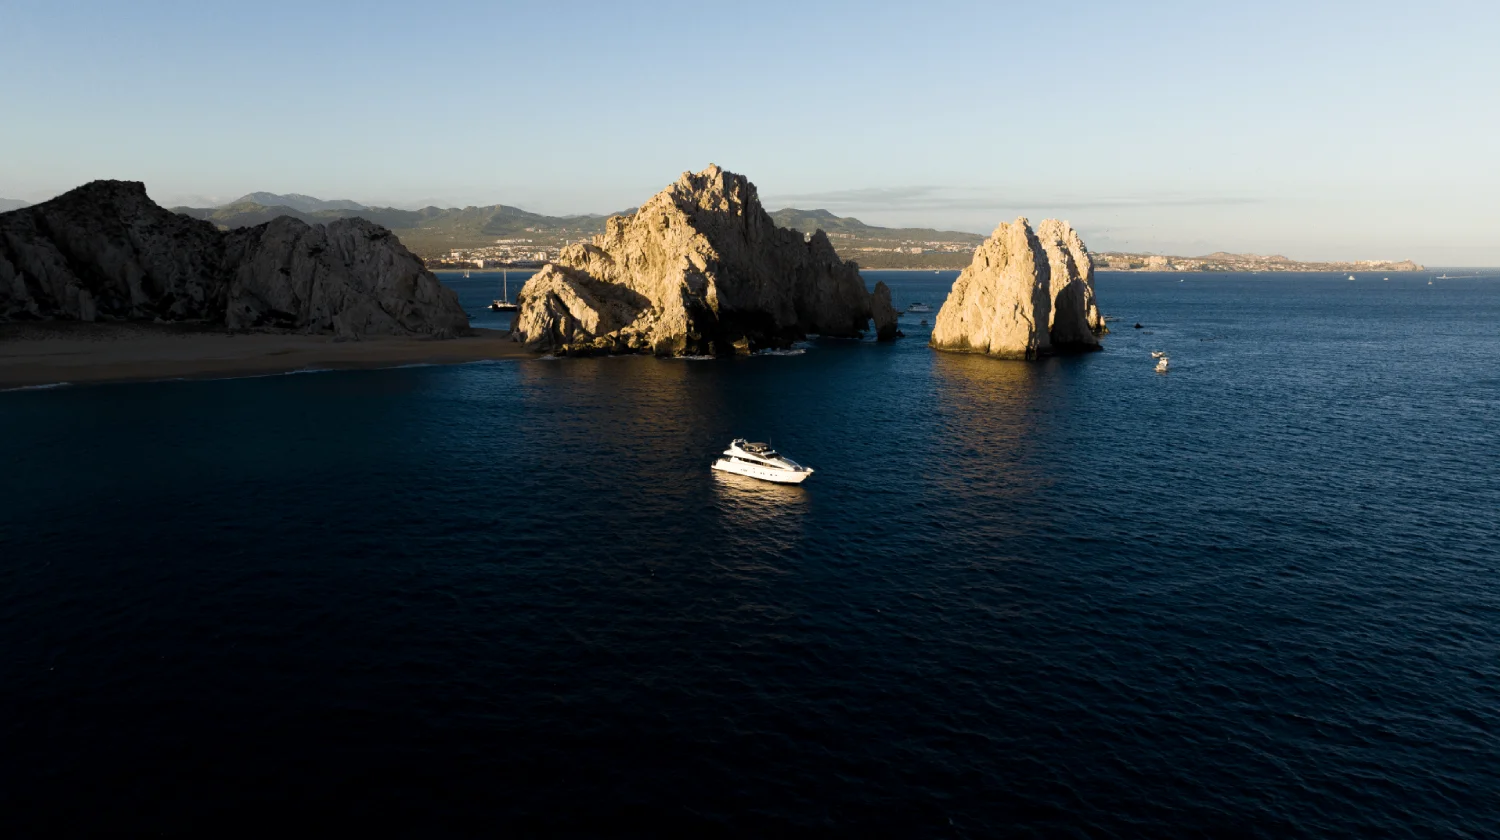 yachts for rent los cabos